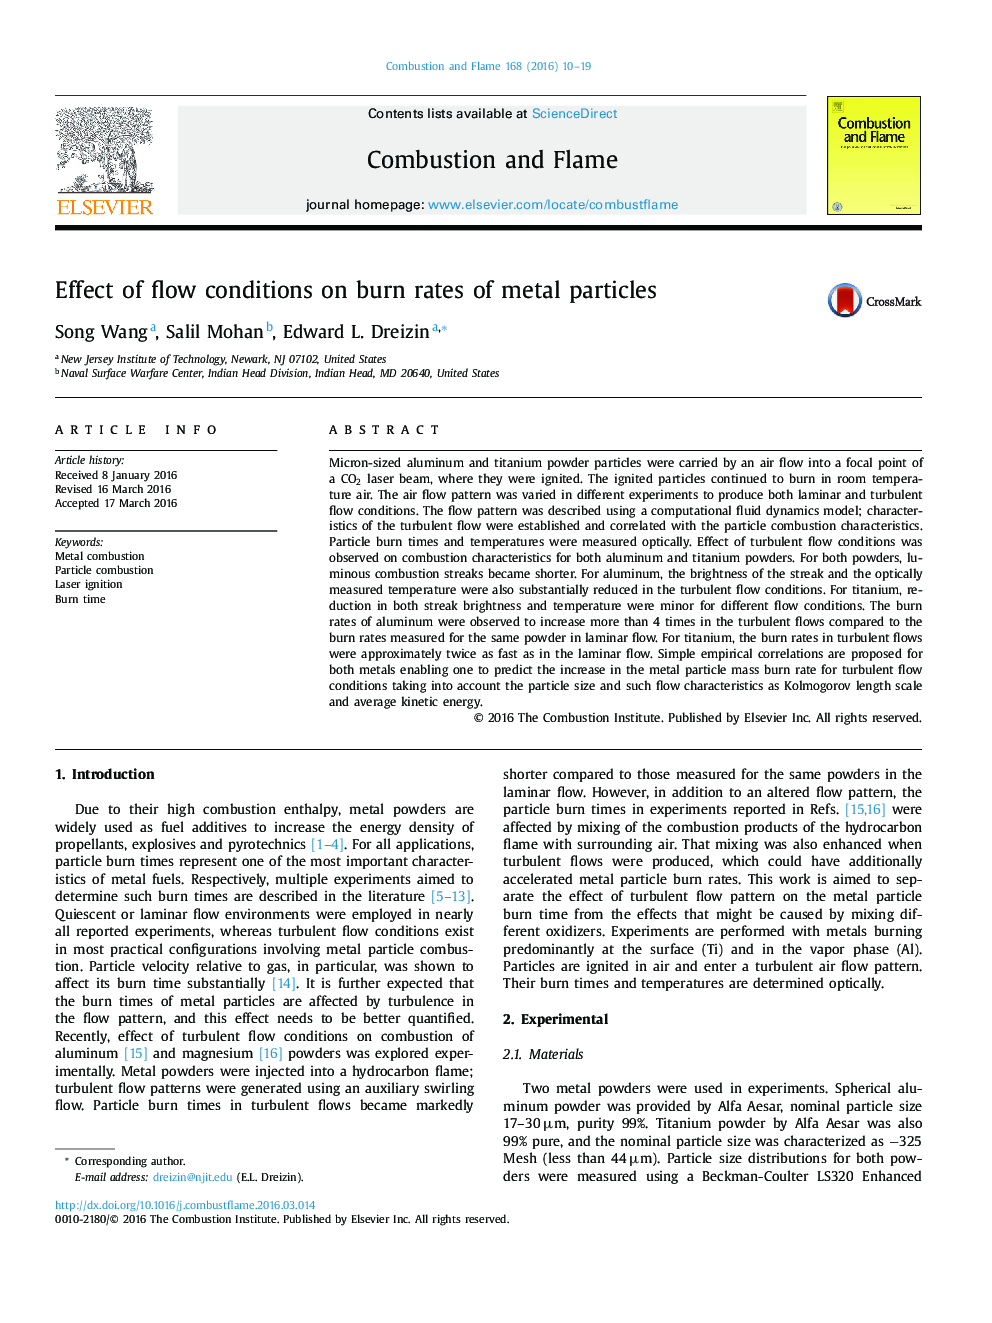 Effect of flow conditions on burn rates of metal particles